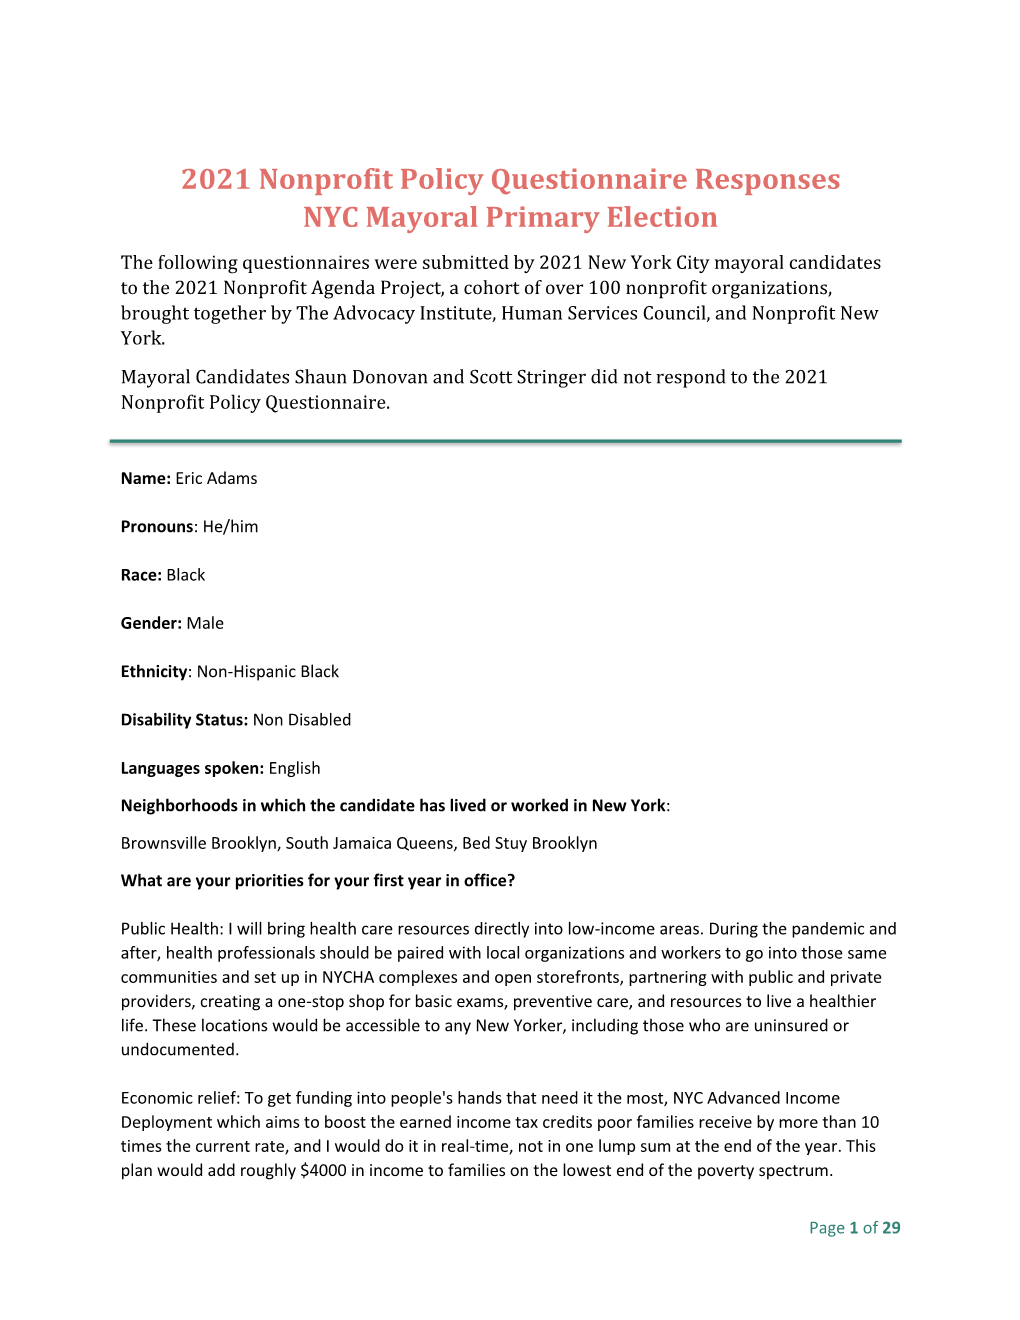 2021-Nonprofit-Policy-Questionnaire-Mayoral-Candidate-Responses